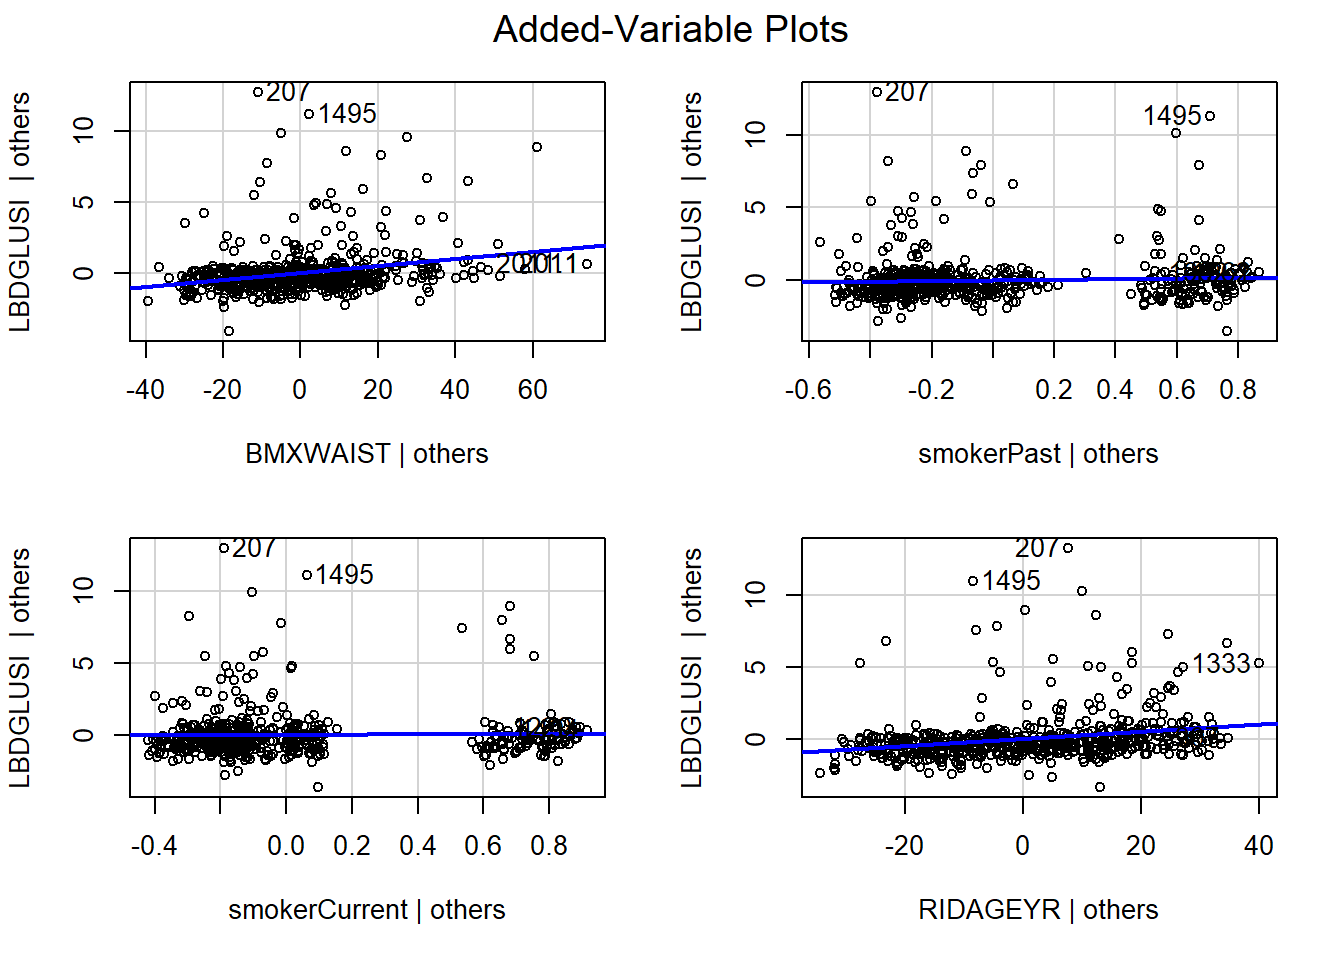 Added variable plots